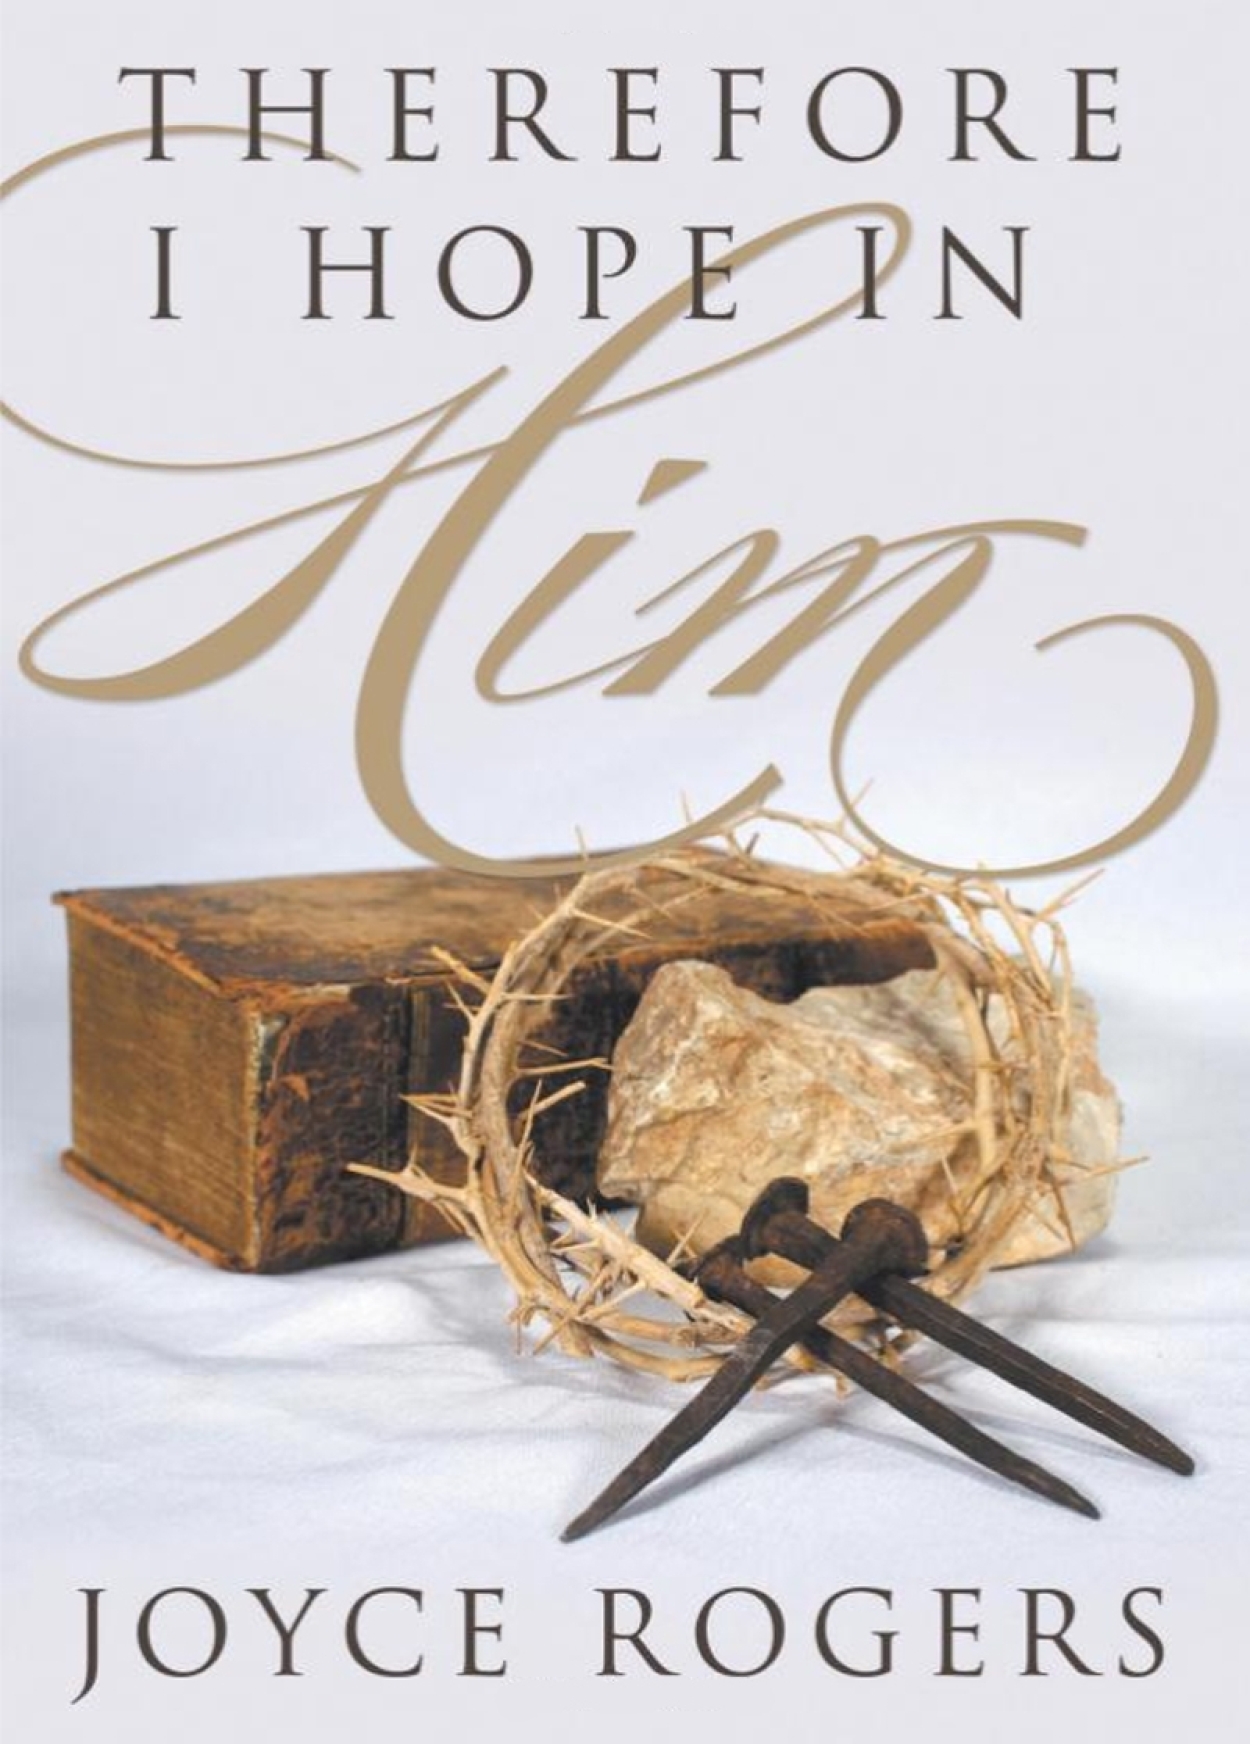 Therefore I hope in Him book joyce rogers jb09